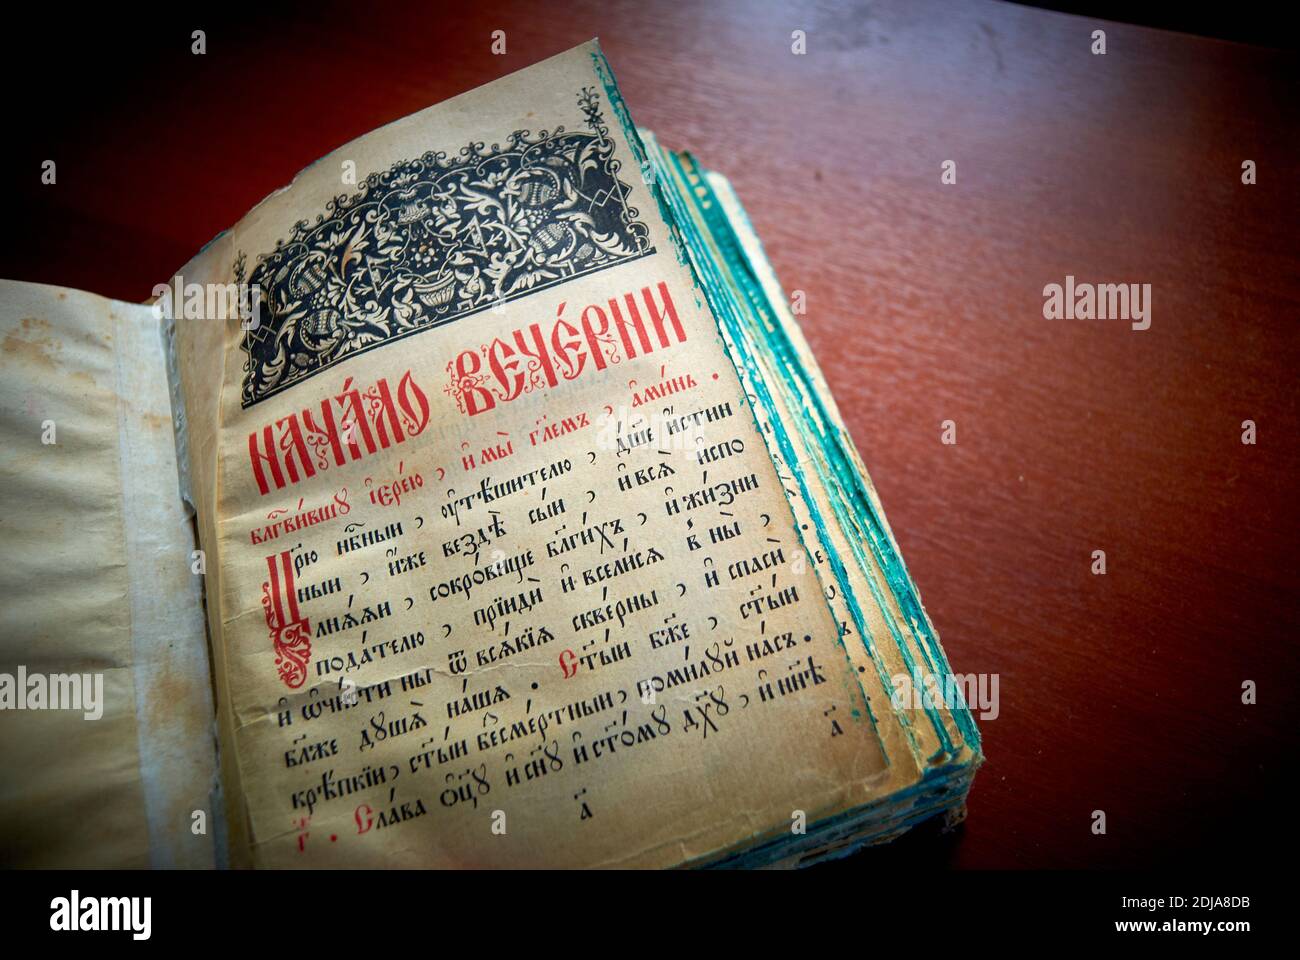 Astrakhan, Russia - 12.04.2011: Old liturgical book in Church Slavonic. The inscription in Russian: 'The beginning of Vespers' Stock Photo